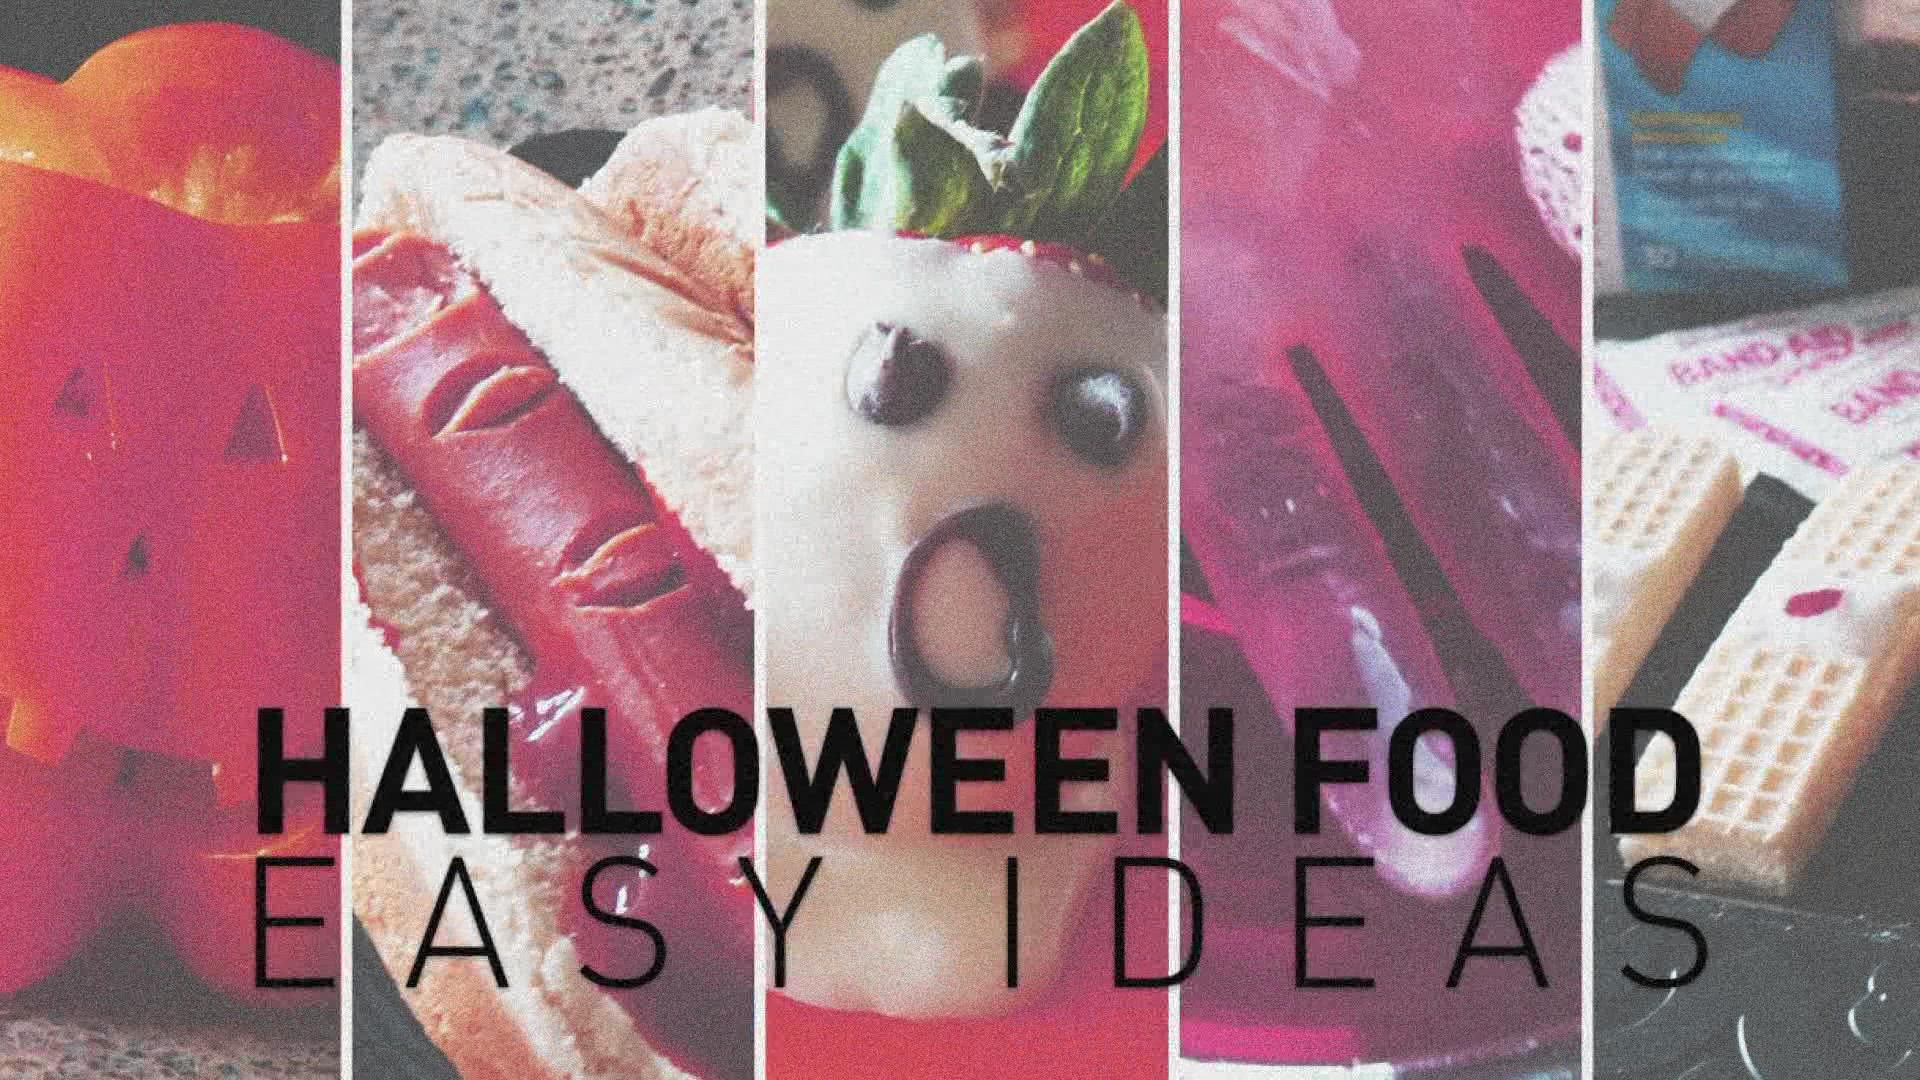 Ideas for easy Halloween food you can make for your next party!